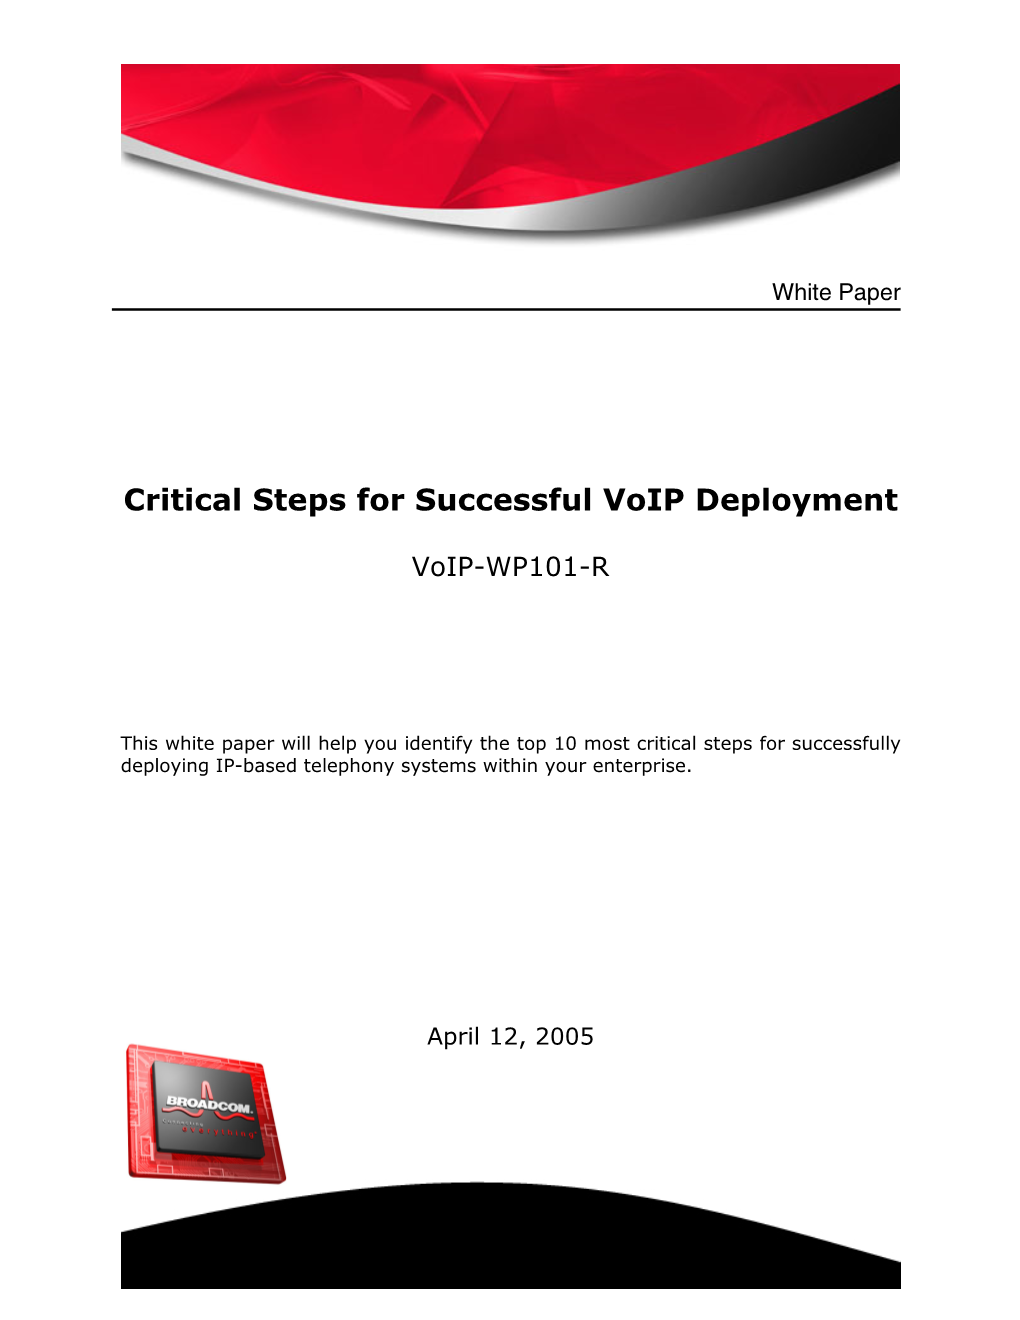 Critical Steps for Successful Voip Deployment